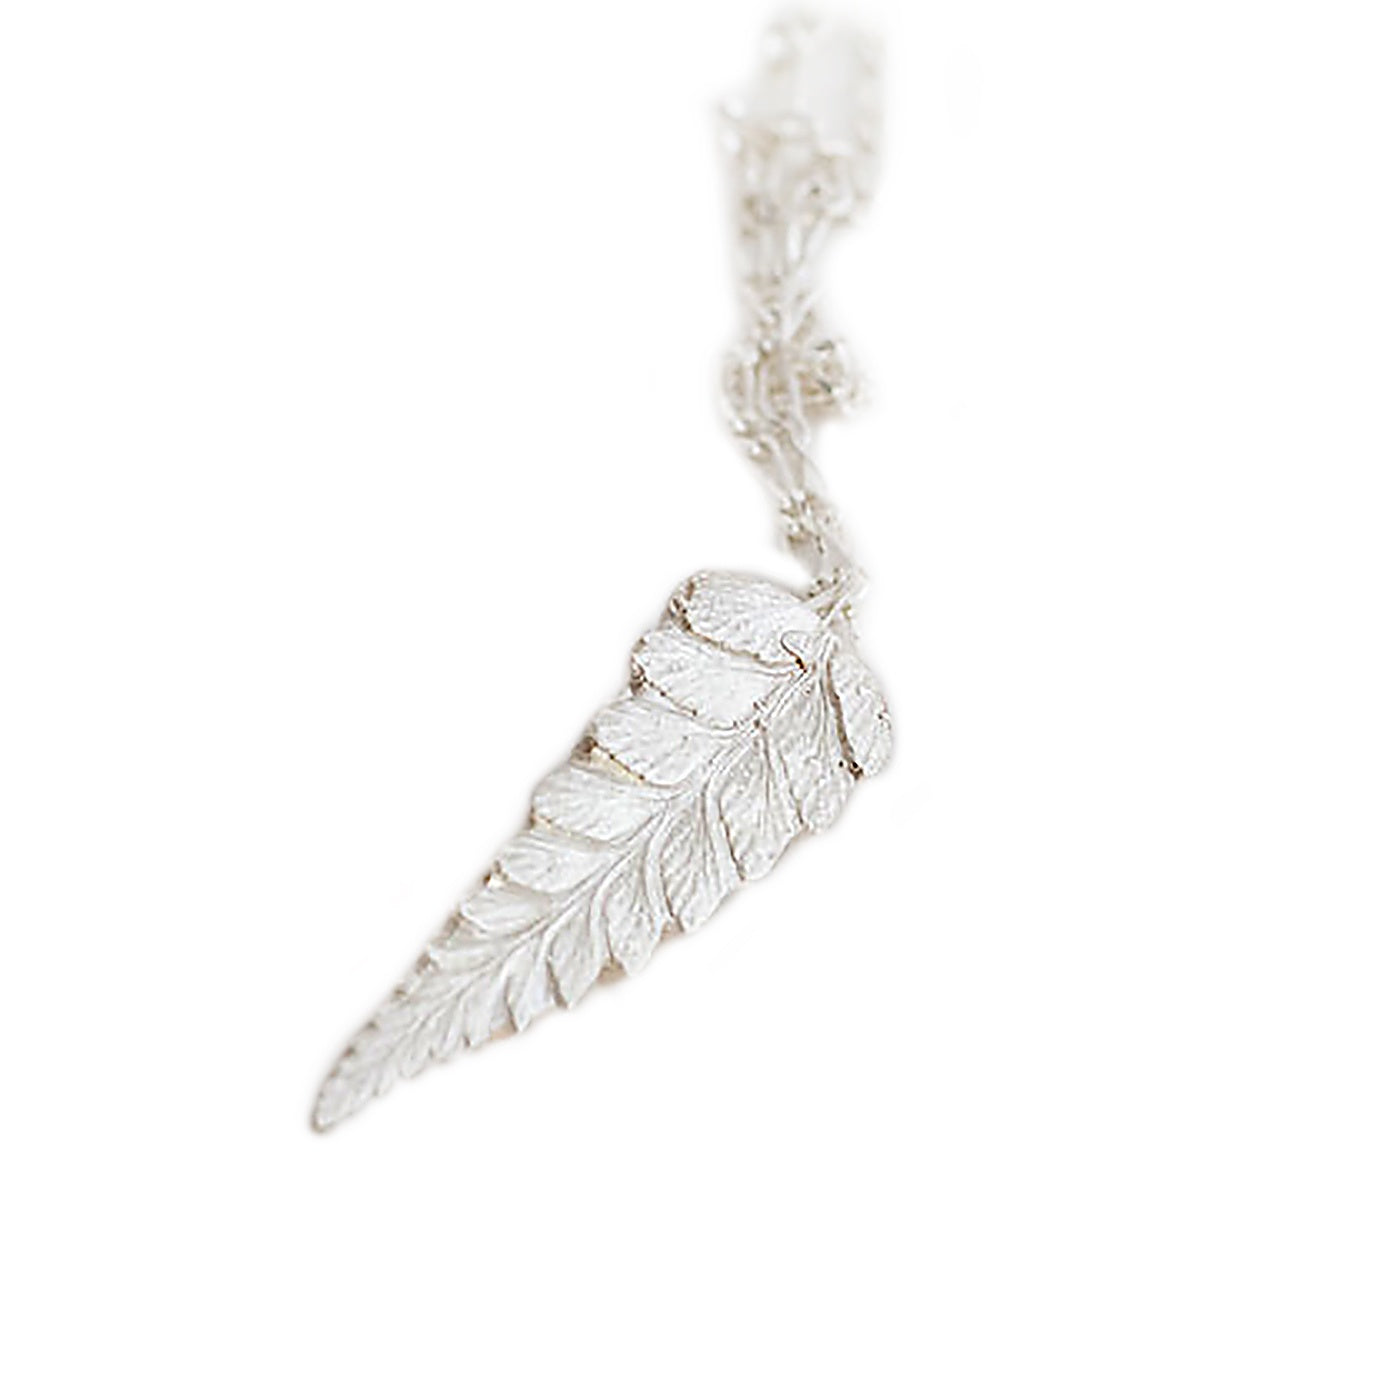 Olivia Hickey - Fern Collection - Pendant - Sterling Silver